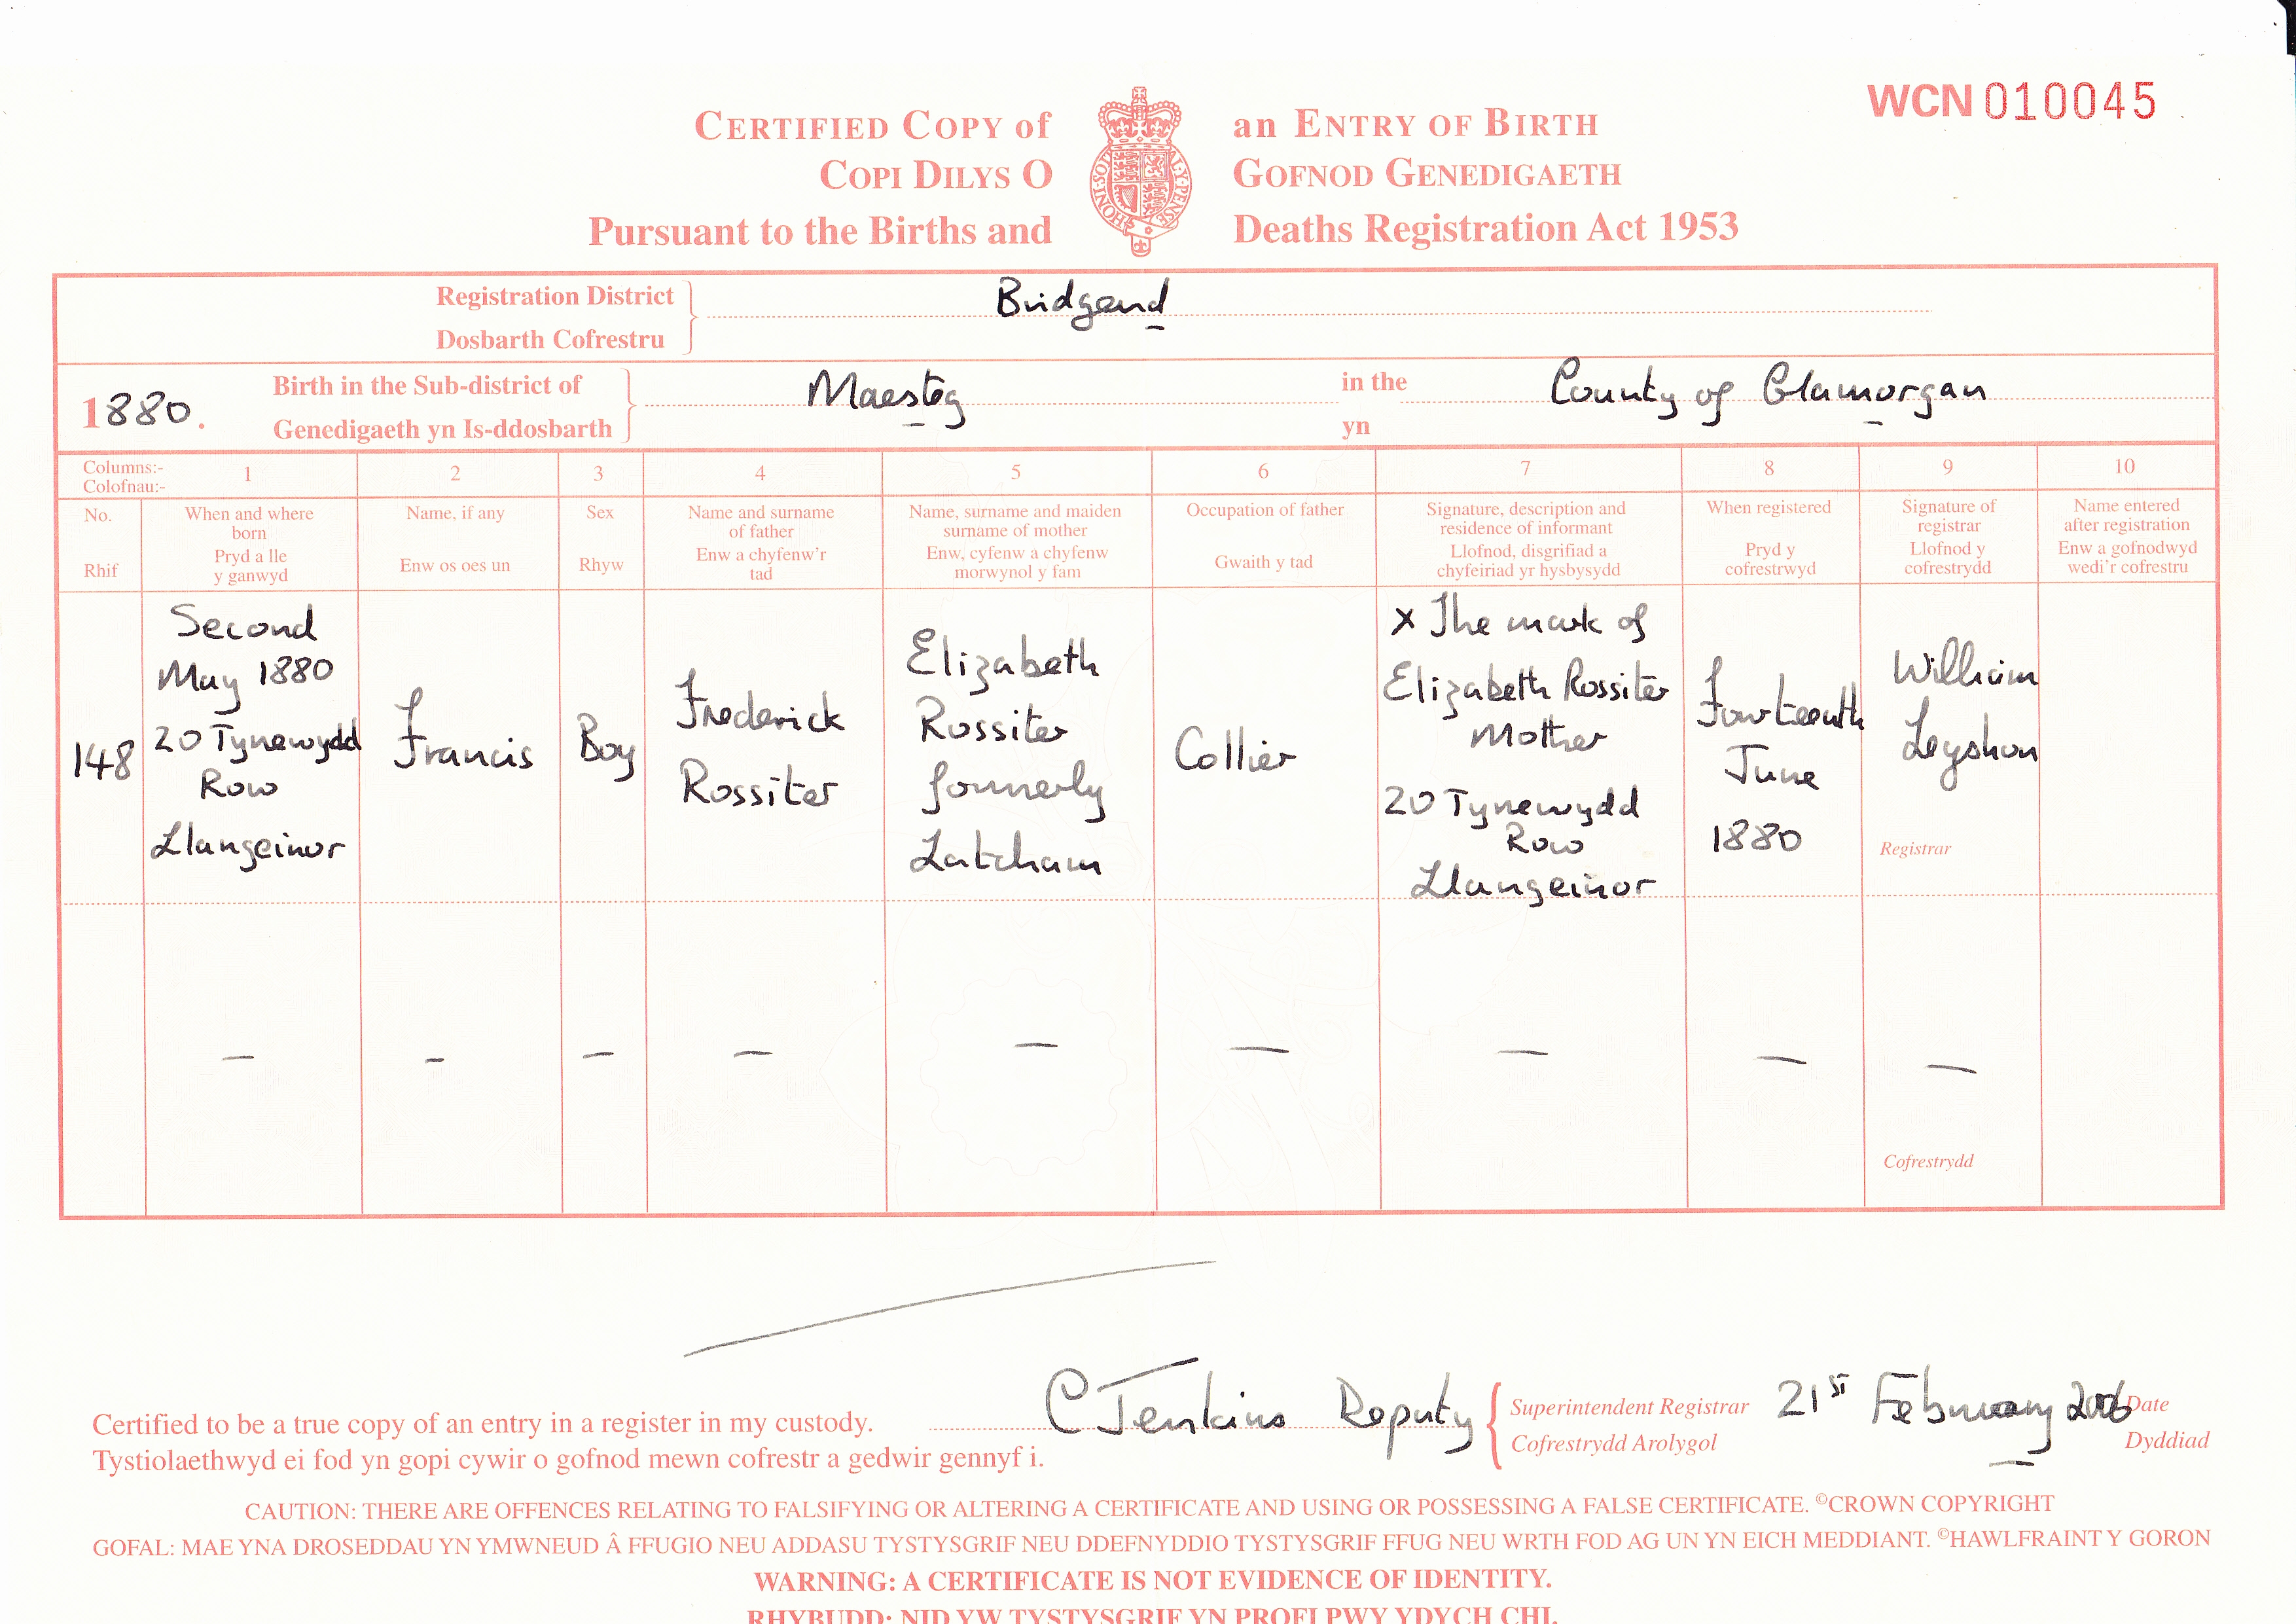 Francis Rossiter birth certificate